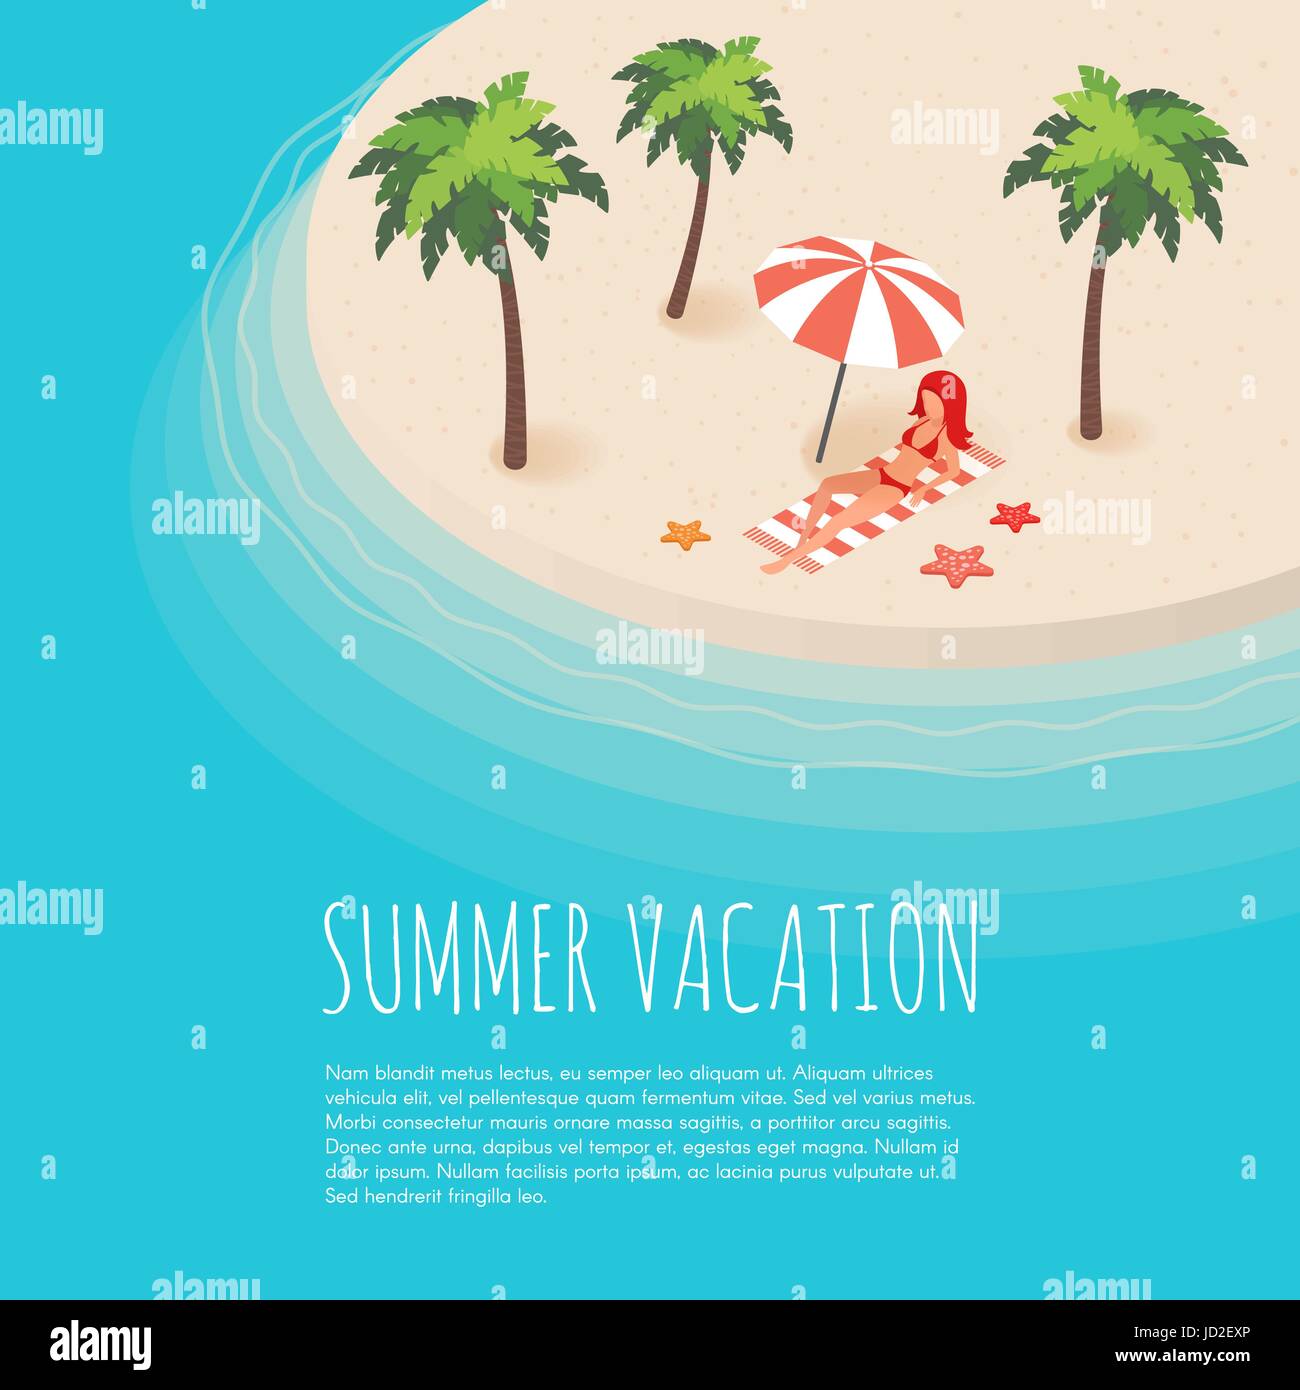 Vector isometric illustration of tropical island with palms. Woman on vacation. Sea. Summer vacation. Vector background Stock Vector